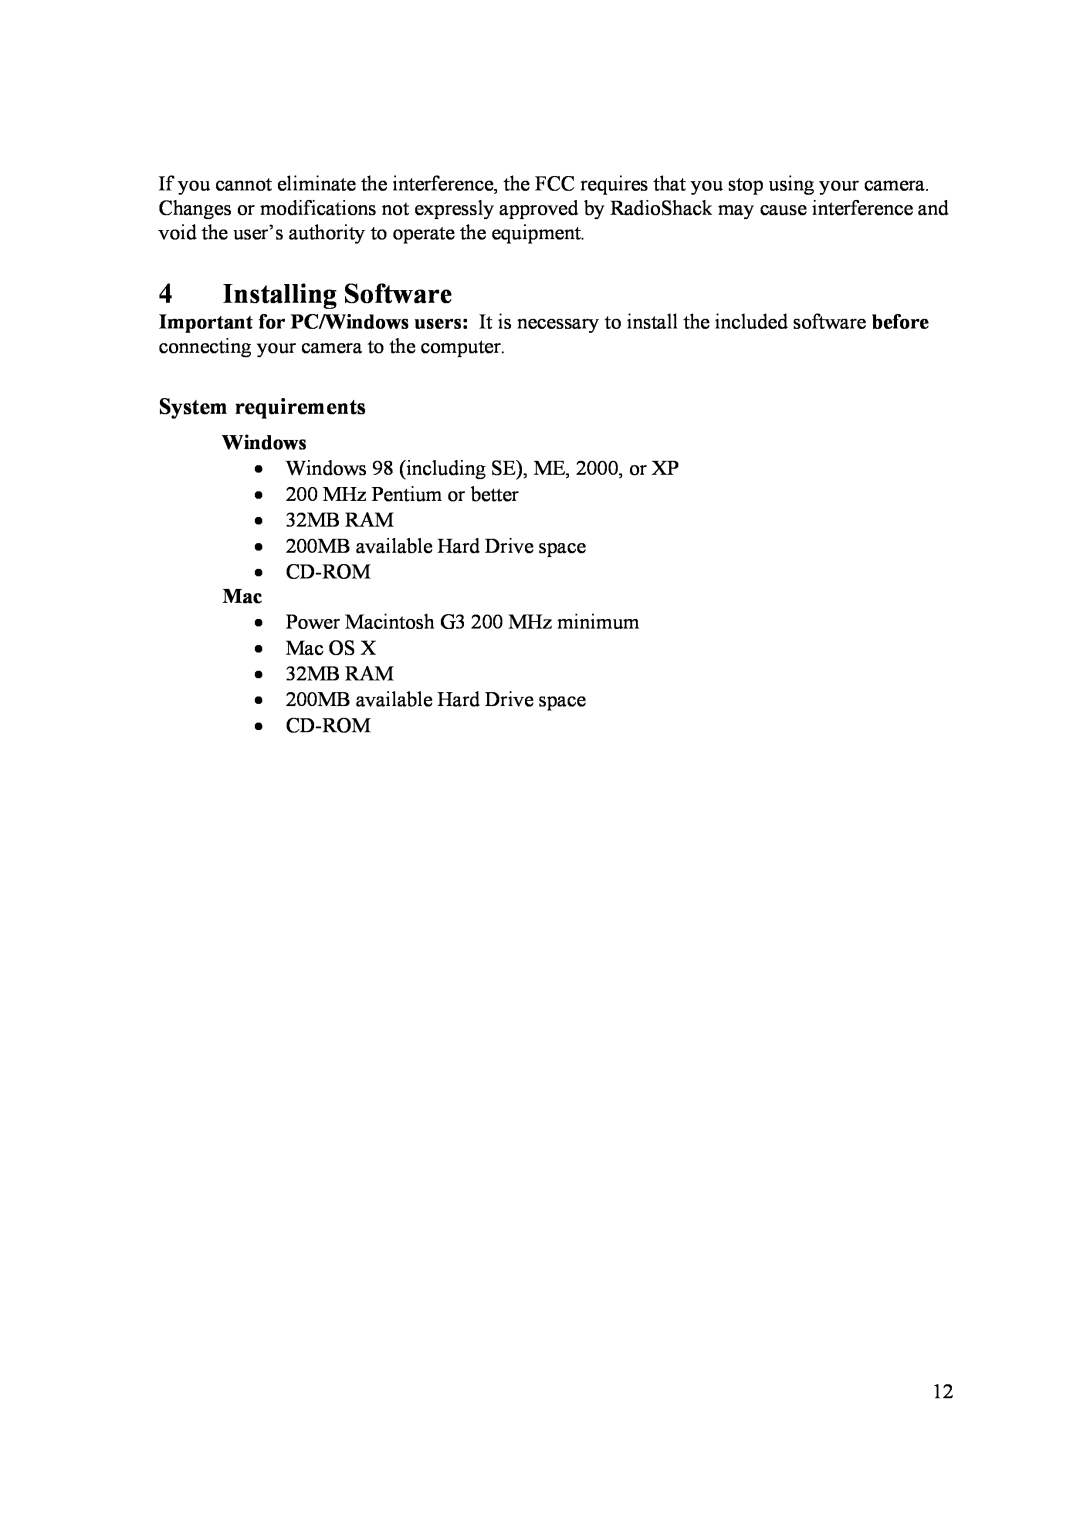 Samsung 2 user manual Installing Software, System requirements, Windows 